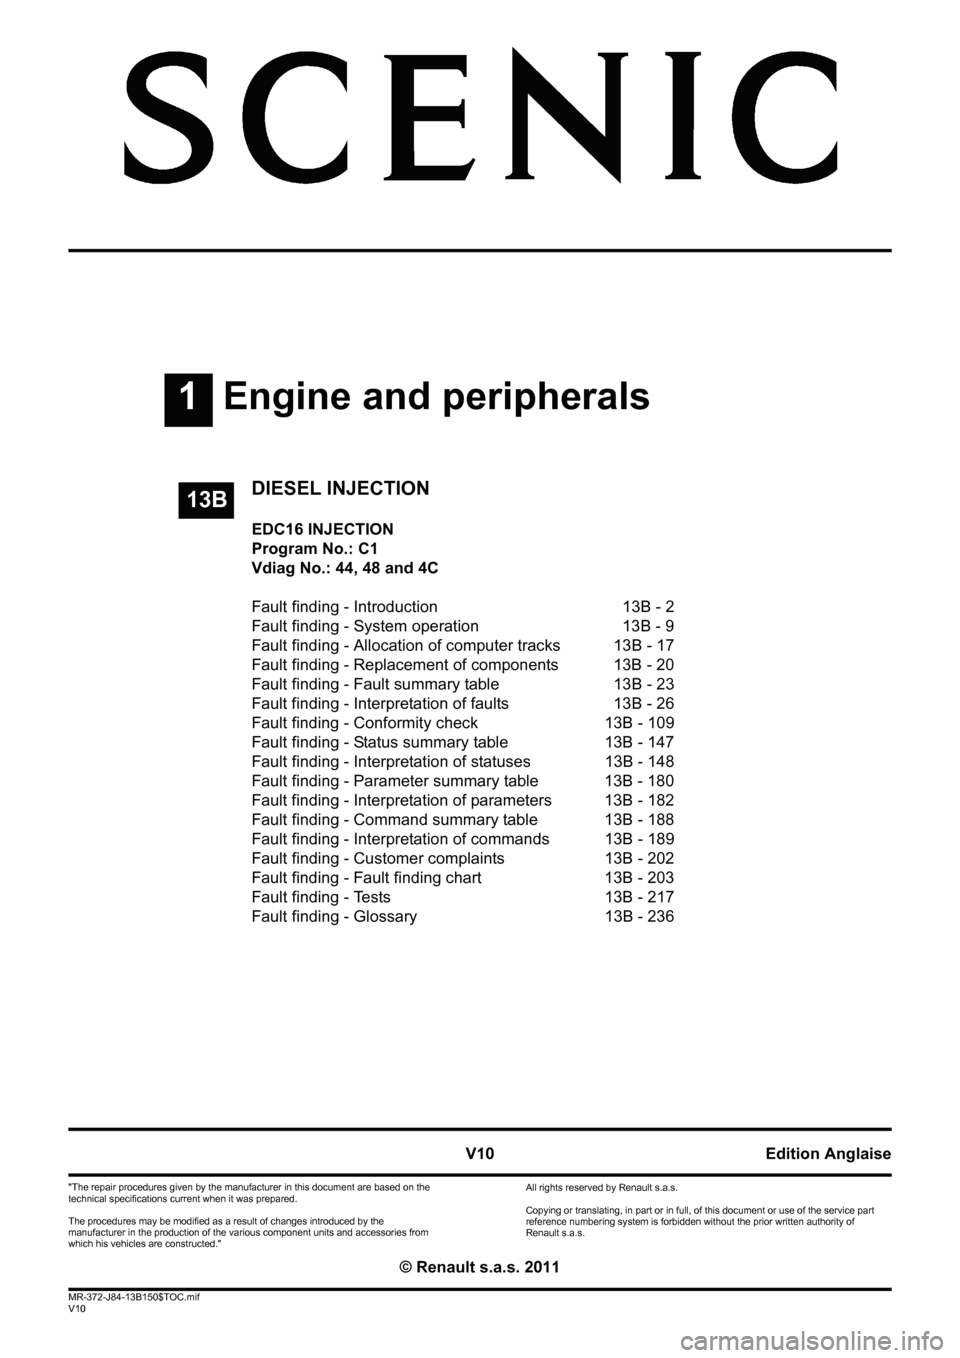 RENAULT SCENIC 2011 J95 / 3.G Engine And Peripherals EDC16 Injection Workshop Manual 1Engine and peripherals
V10 MR-372-J84-13B150$TOC.mif
V10
13B
"The repair procedures given by the manufacturer in this document are based on the 
technical specifications current when it was prepared.